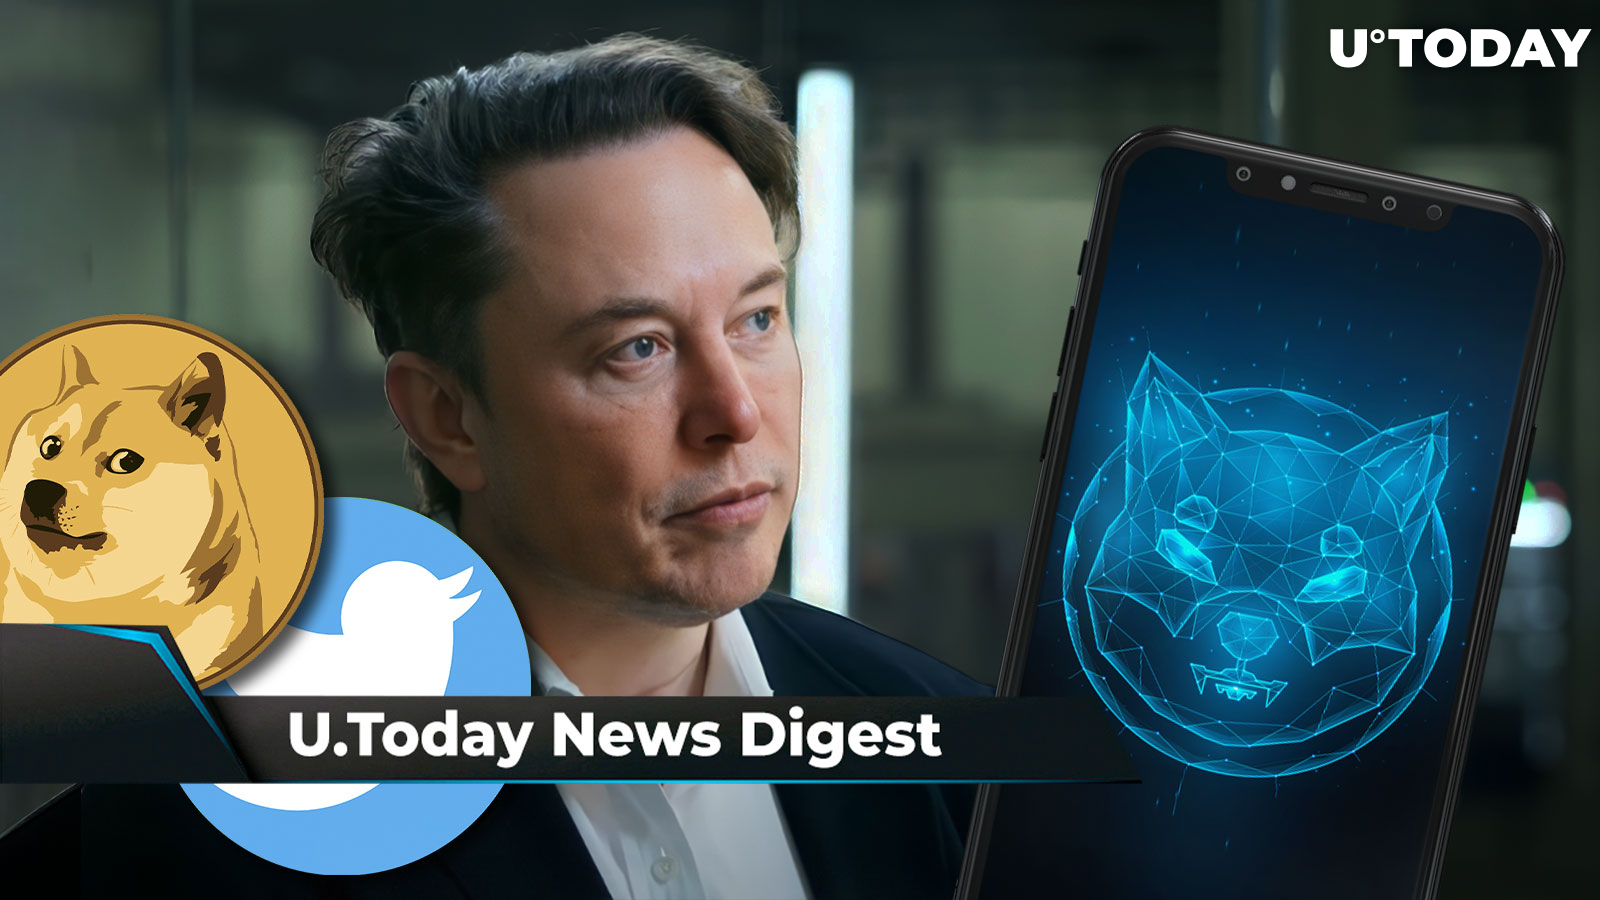 Ripple Ad Appears in Wall Street Station, DOGE Up 13% as Elon Musk Twitter Deal Nears Conclusion, SHIB Sets New Milestone: Crypto News Digest by U.Today